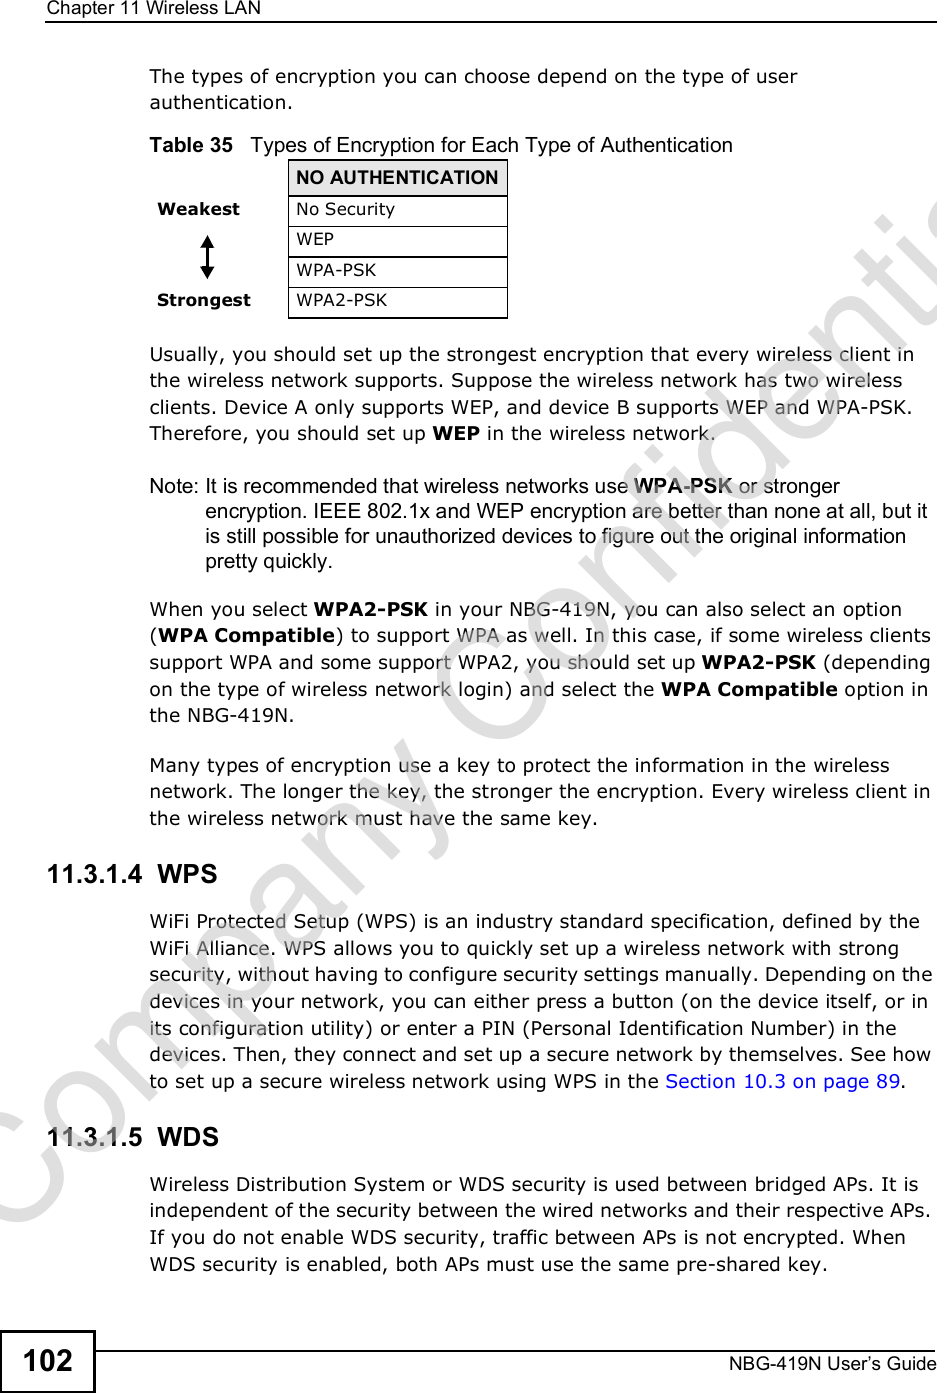 Chapter 11Wireless LANNBG-419N User s Guide102The types of encryption you can choose depend on the type of user authentication. Usually, you should set up the strongest encryption that every wireless client in the wireless network supports. Suppose the wireless network has two wireless clients. Device A only supports WEP, and device B supports WEP and WPA-PSK. Therefore, you should set up WEP in the wireless network.Note: It is recommended that wireless networks use WPA-PSK or stronger encryption. IEEE 802.1x and WEP encryption are better than none at all, but it is still possible for unauthorized devices to figure out the original information pretty quickly.When you select WPA2-PSK in your NBG-419N, you can also select an option (WPA Compatible) to support WPA as well. In this case, if some wireless clients support WPA and some support WPA2, you should set up WPA2-PSK (depending on the type of wireless network login) and select the WPA Compatible option in the NBG-419N.Many types of encryption use a key to protect the information in the wireless network. The longer the key, the stronger the encryption. Every wireless client in the wireless network must have the same key.11.3.1.4  WPSWiFi Protected Setup (WPS) is an industry standard specification, defined by the WiFi Alliance. WPS allows you to quickly set up a wireless network with strong security, without having to configure security settings manually. Depending on the devices in your network, you can either press a button (on the device itself, or in its configuration utility) or enter a PIN (Personal Identification Number) in the devices. Then, they connect and set up a secure network by themselves. See how to set up a secure wireless network using WPS in the Section 10.3 on page 89. 11.3.1.5  WDSWireless Distribution System or WDS security is used between bridged APs. It is independent of the security between the wired networks and their respective APs. If you do not enable WDS security, traffic between APs is not encrypted. When WDS security is enabled, both APs must use the same pre-shared key.Table 35   Types of Encryption for Each Type of AuthenticationNO AUTHENTICATIONWeakest No SecurityWEPWPA-PSKStrongest WPA2-PSKCompany Confidential